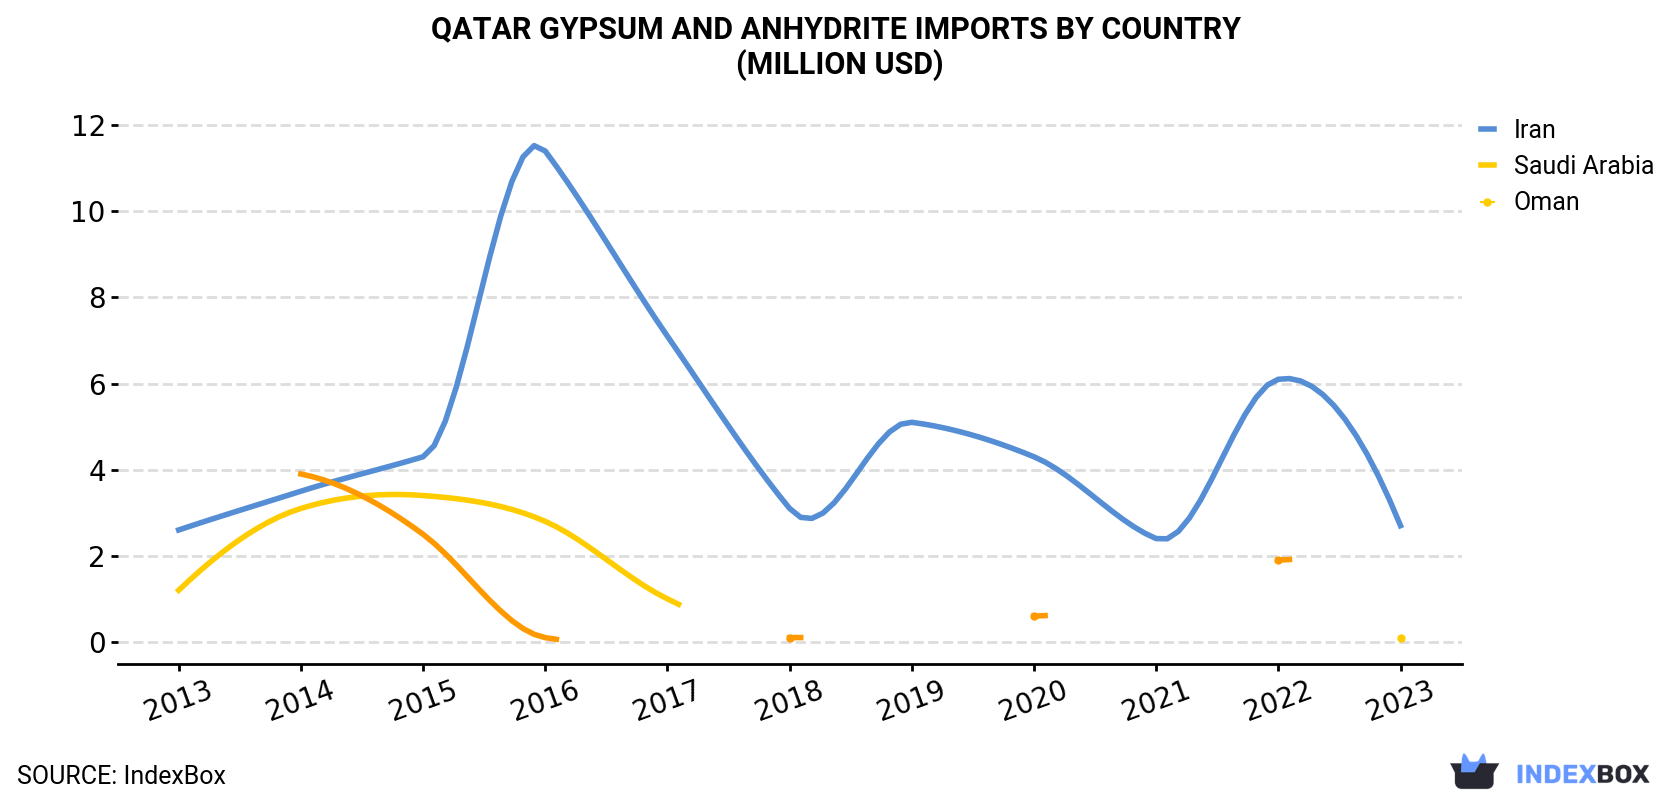 Qatar Gypsum And Anhydrite Imports By Country (Million USD)